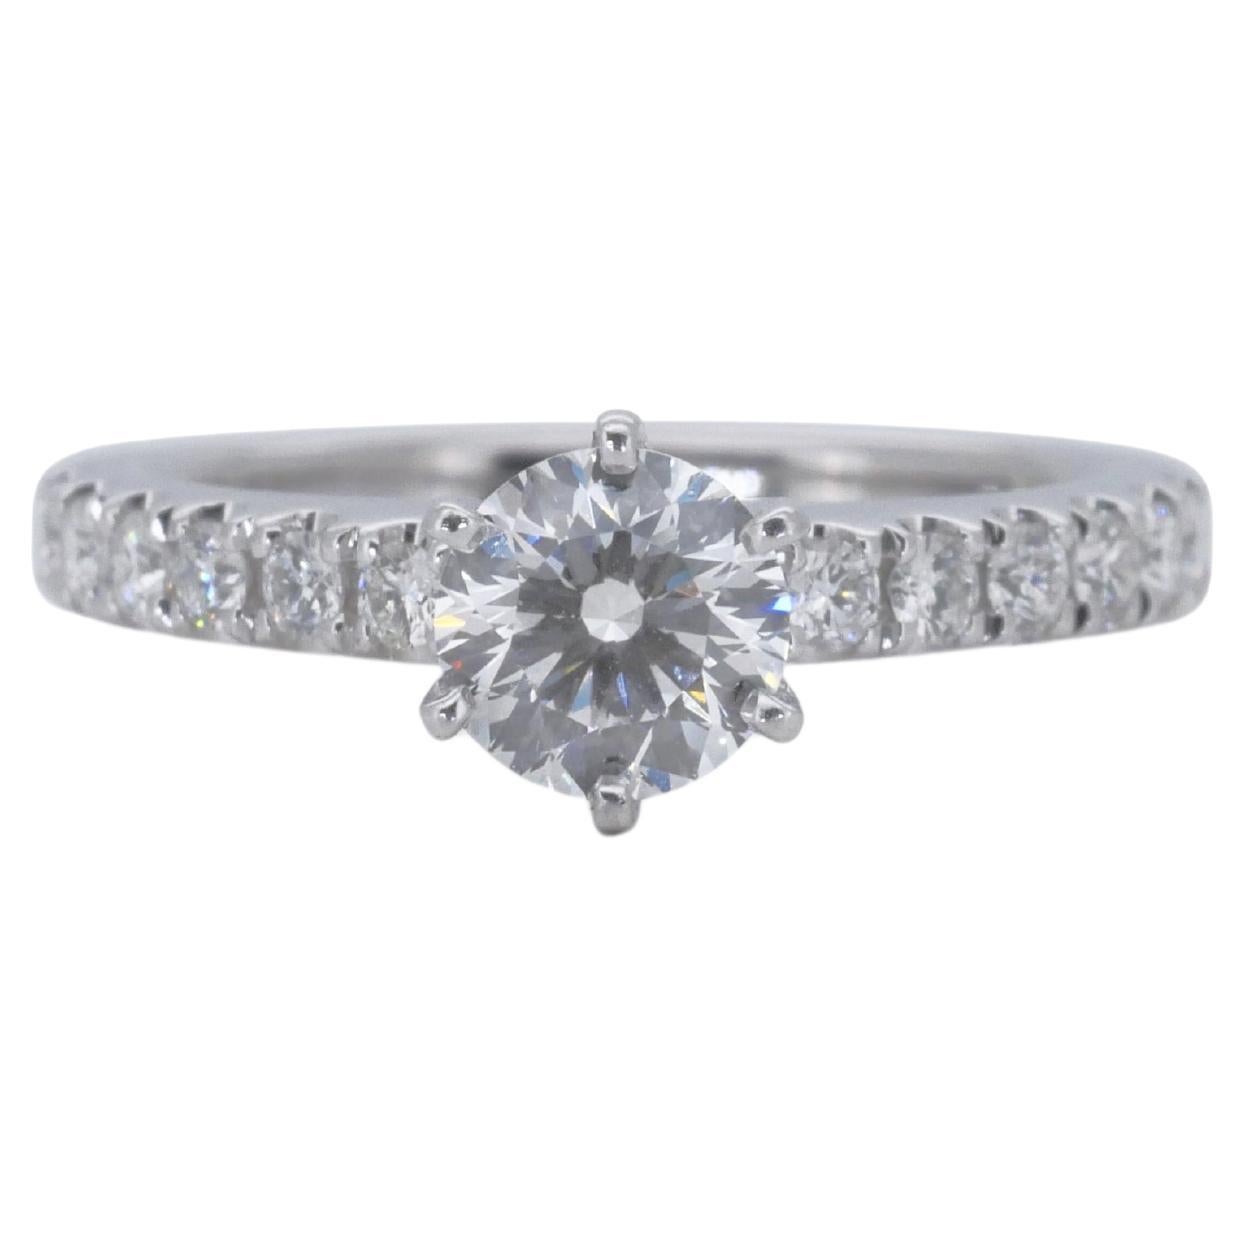 Beautiful 18k White Gold Pave Ring with 0.73 Carat Weight of Natural Diamonds